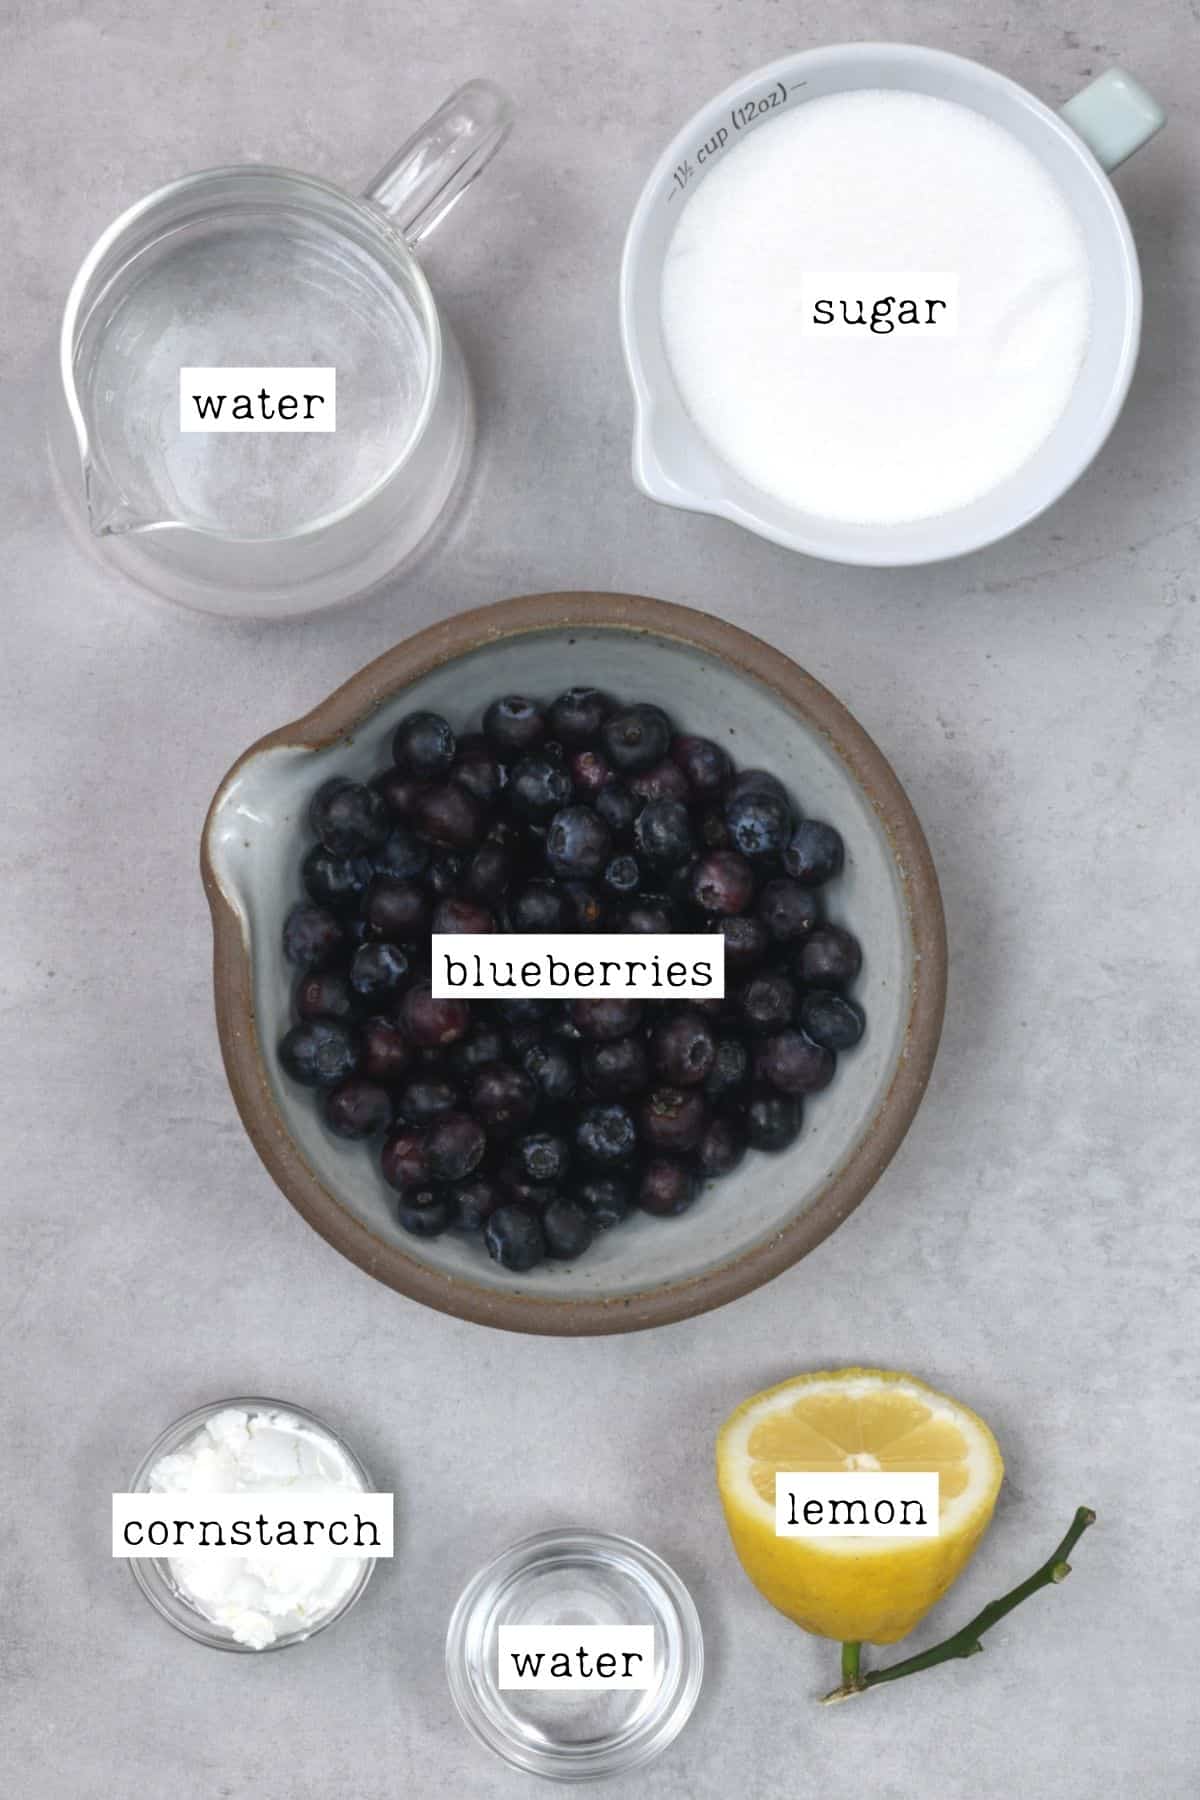 Ingredients for blueberry syrup